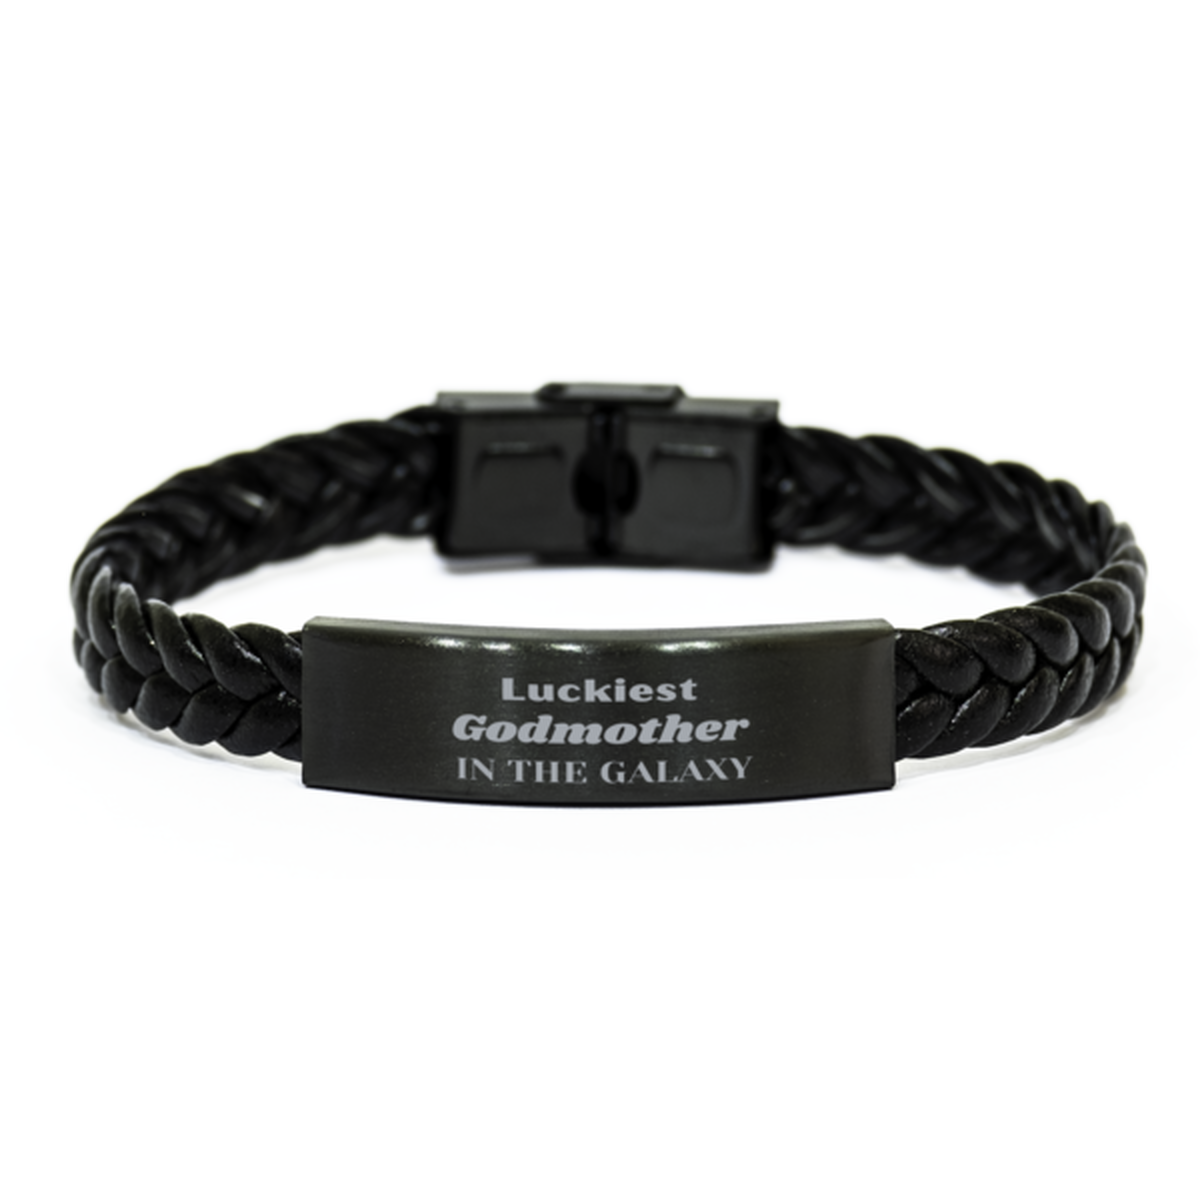 Luckiest Godmother in the Galaxy, To My Godmother Engraved Gifts, Christmas Godmother Braided Leather Bracelet Gifts, X-mas Birthday Unique Gifts For Godmother Men Women